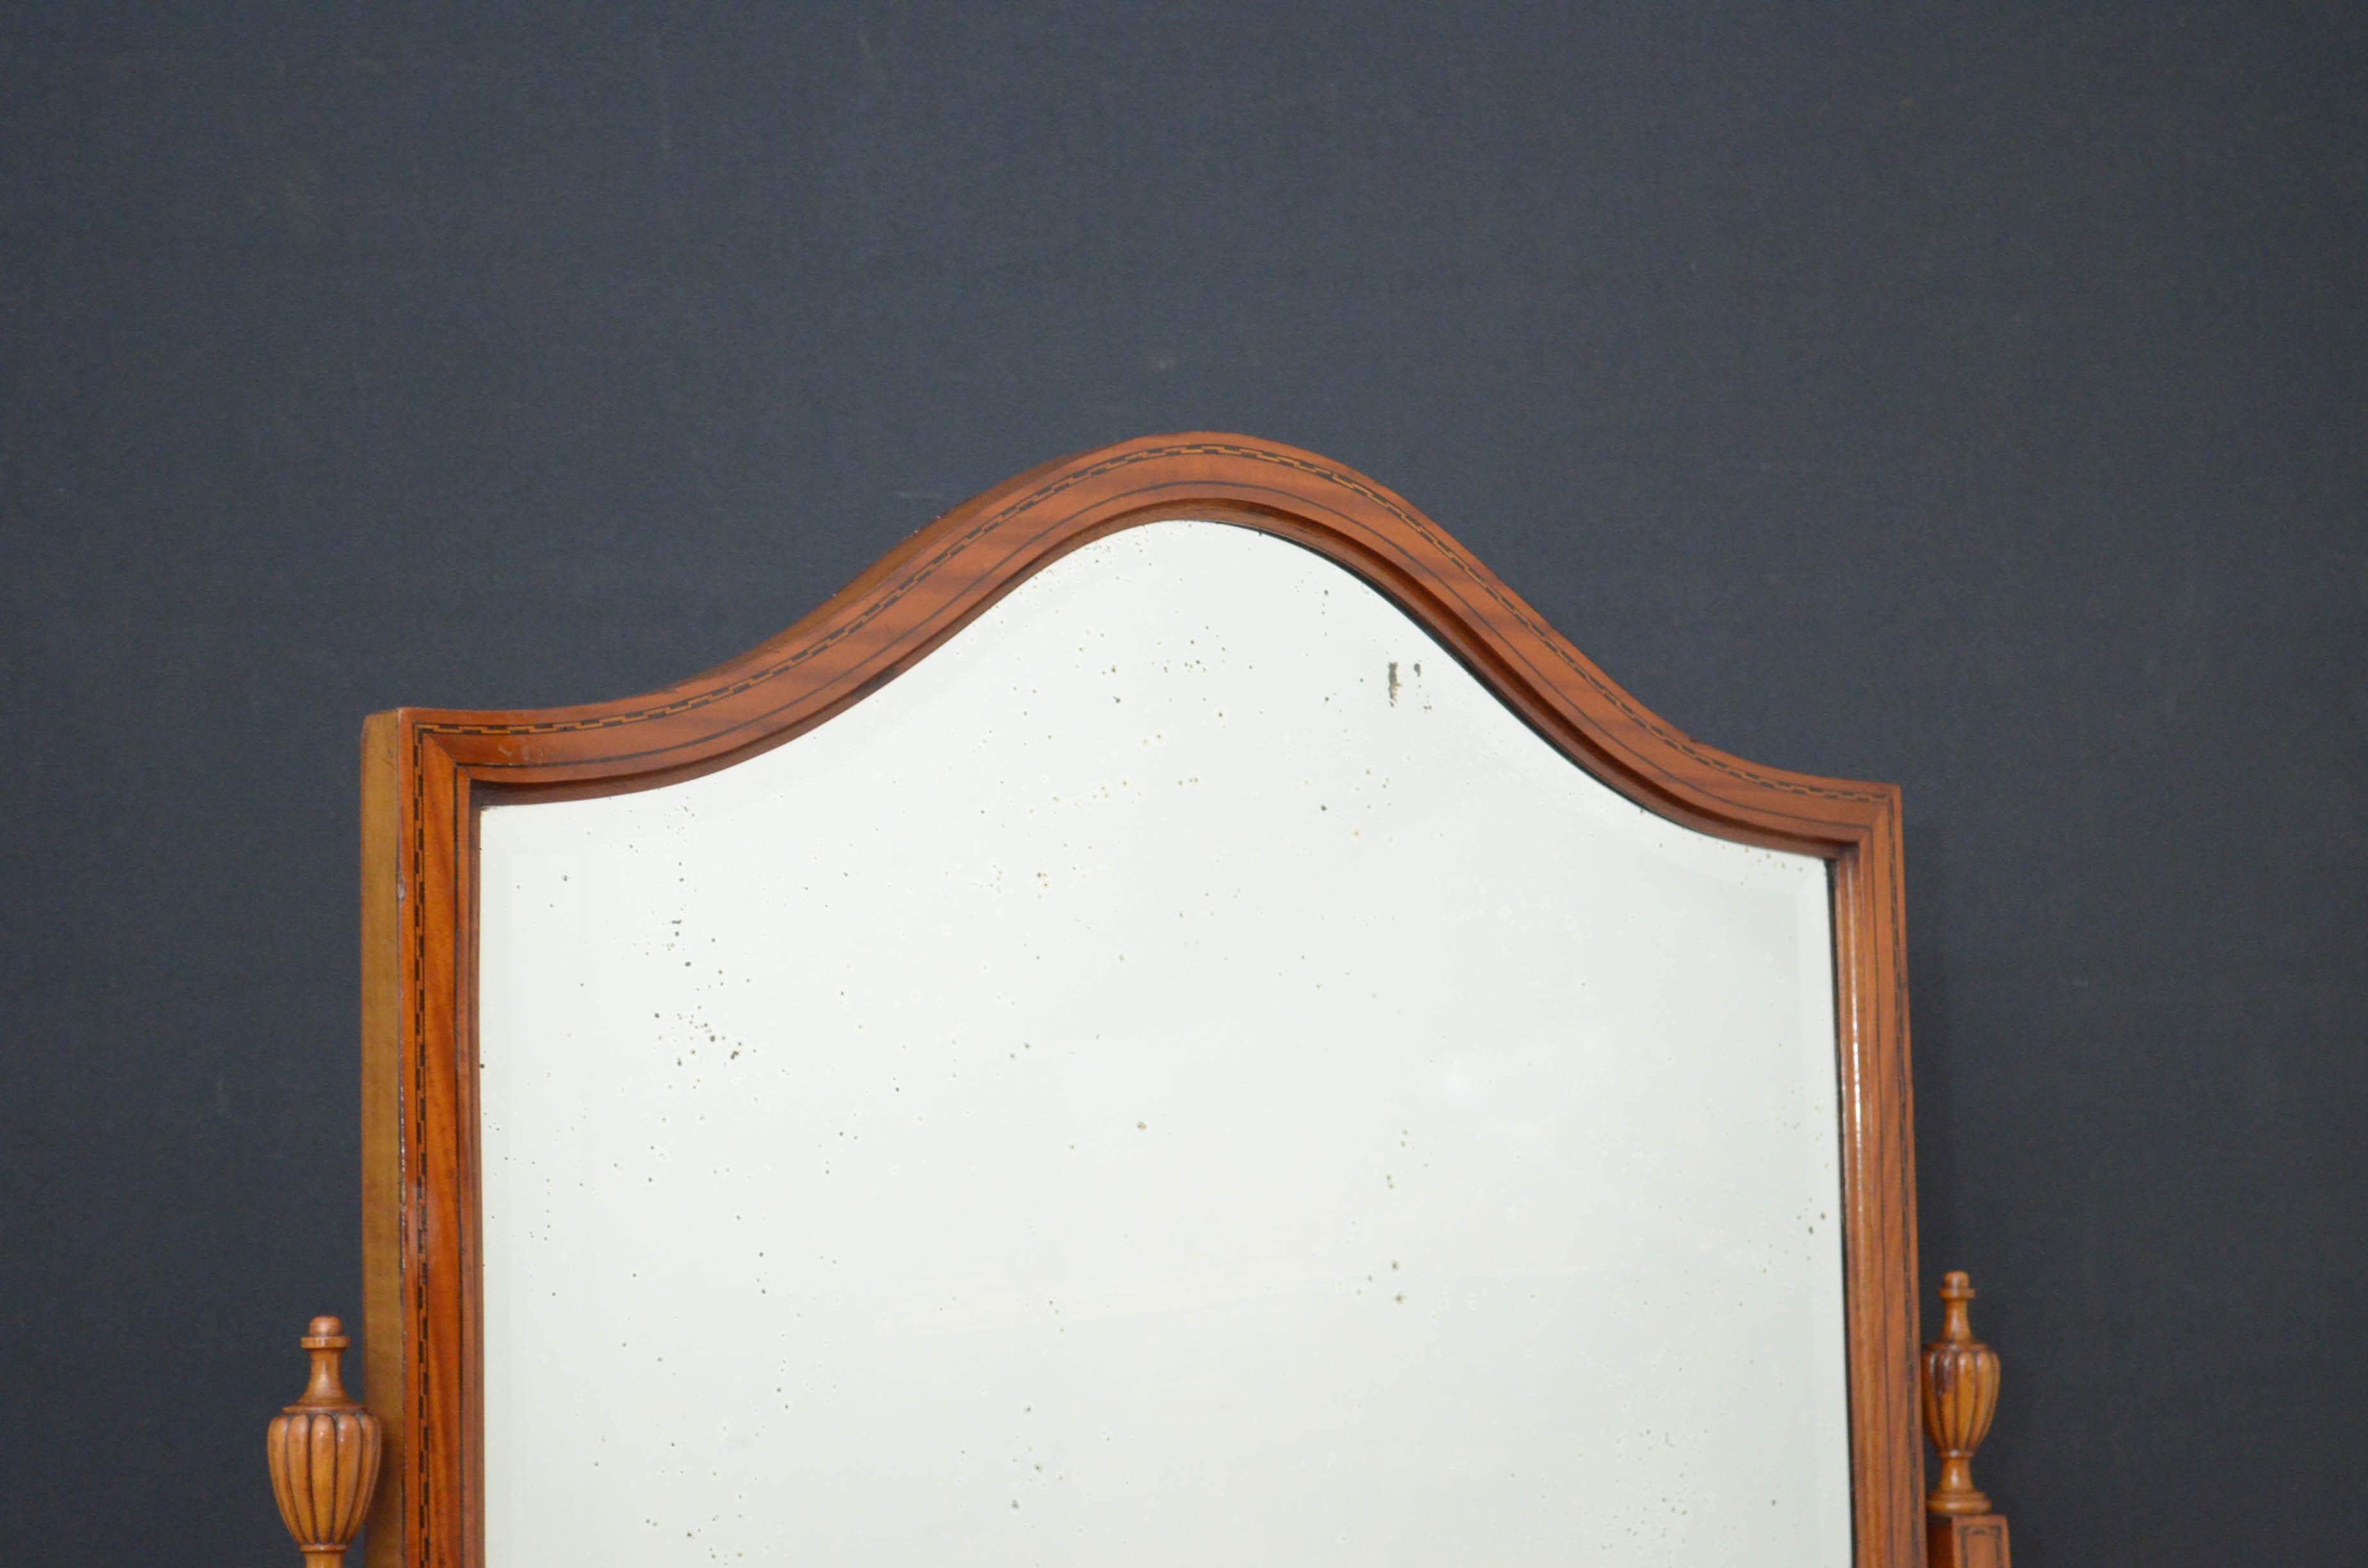 Sn4752, an elegant Edwardian satinwood and inlaid, shield shaped cheval mirror, having original bevelled edge mirror with some silvering in inlaid frame and finely inlaid supports with original fluted finials to top and sun inlays to base, standing